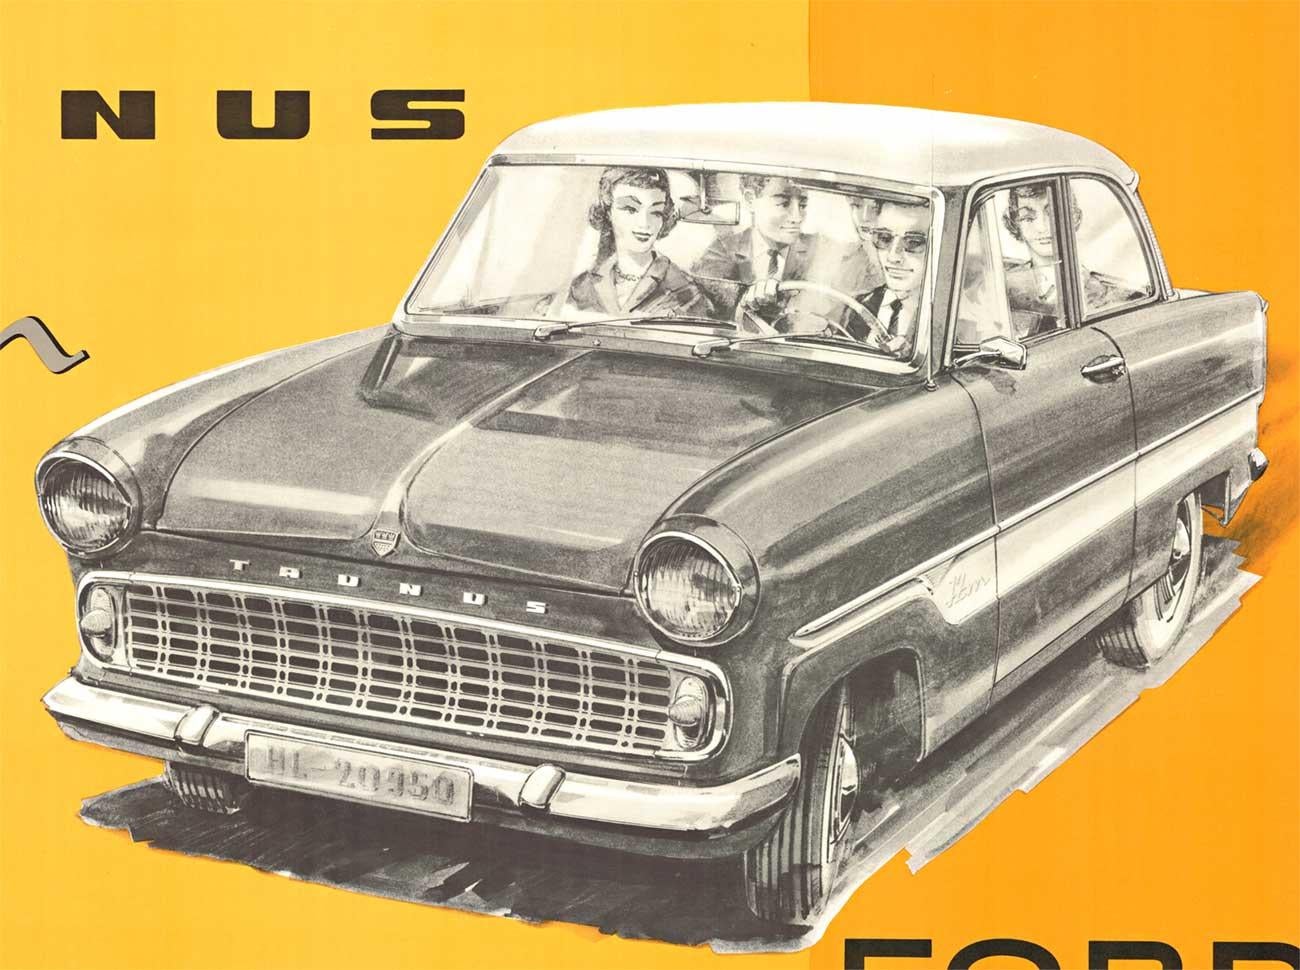 Original Ford, The all New Taunus 12M Super vintage German poster - American Realist Print by Unknown